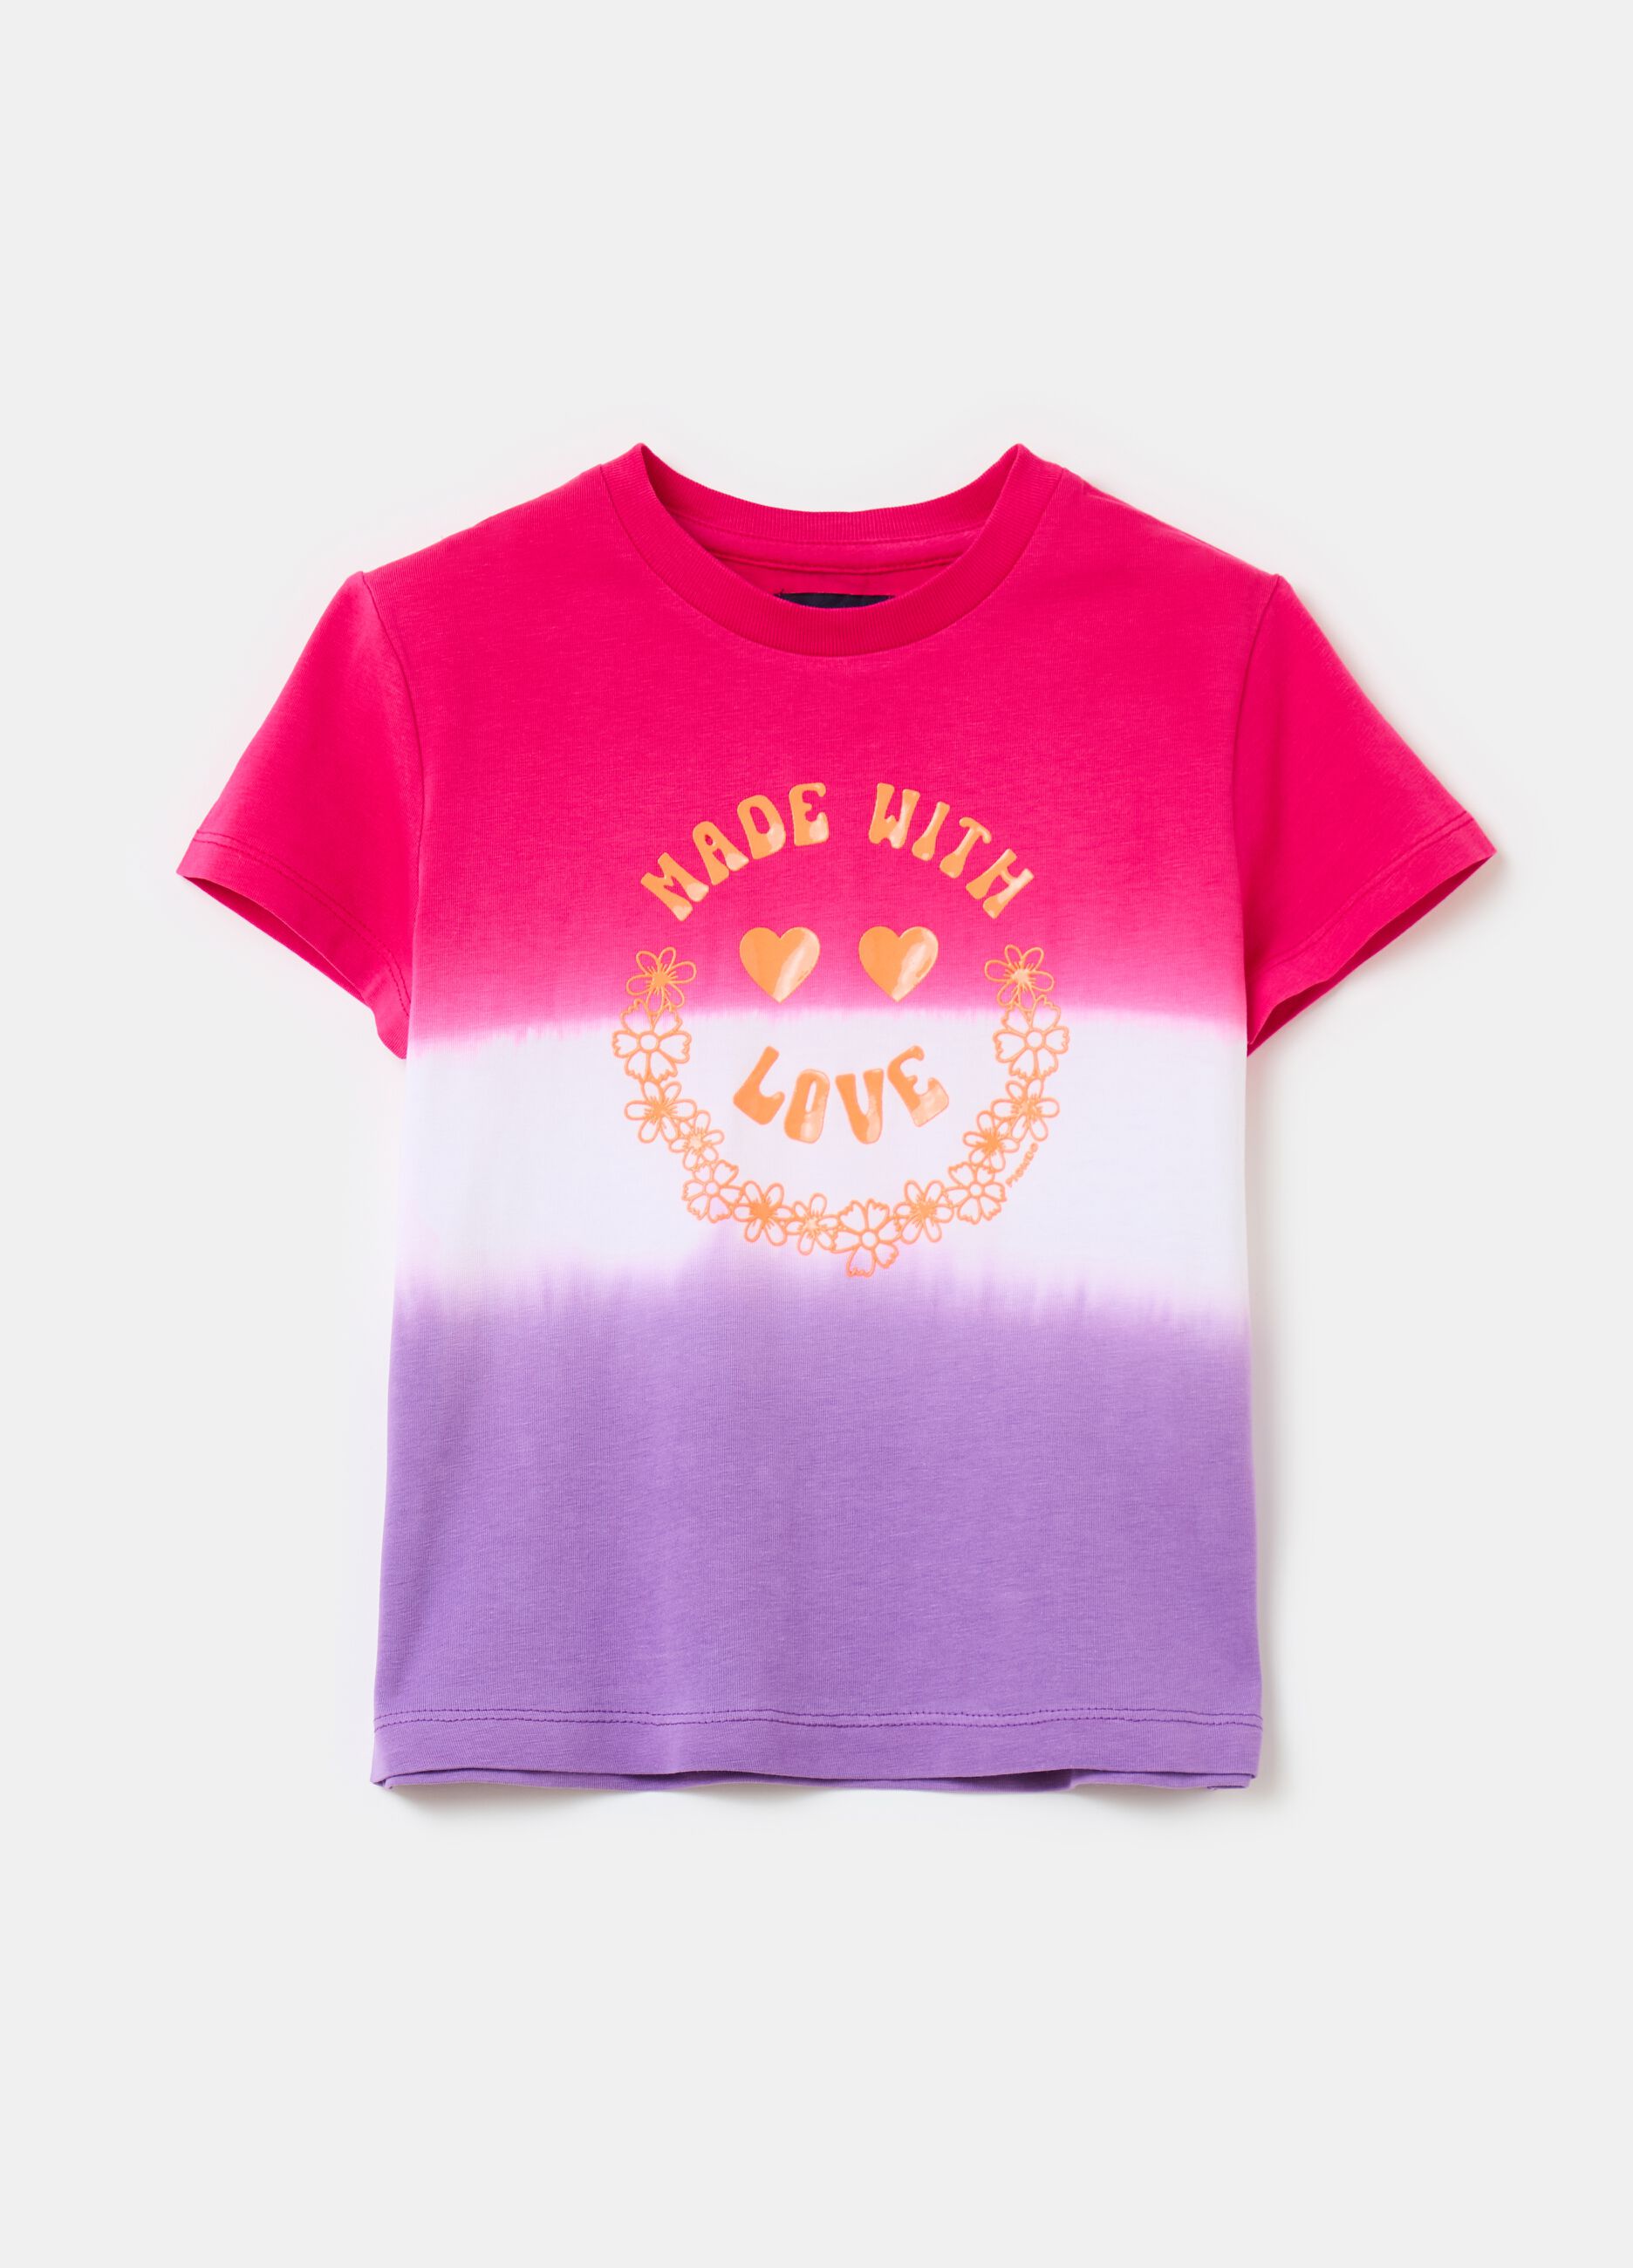 Tie-dye T-shirt with printed lettering